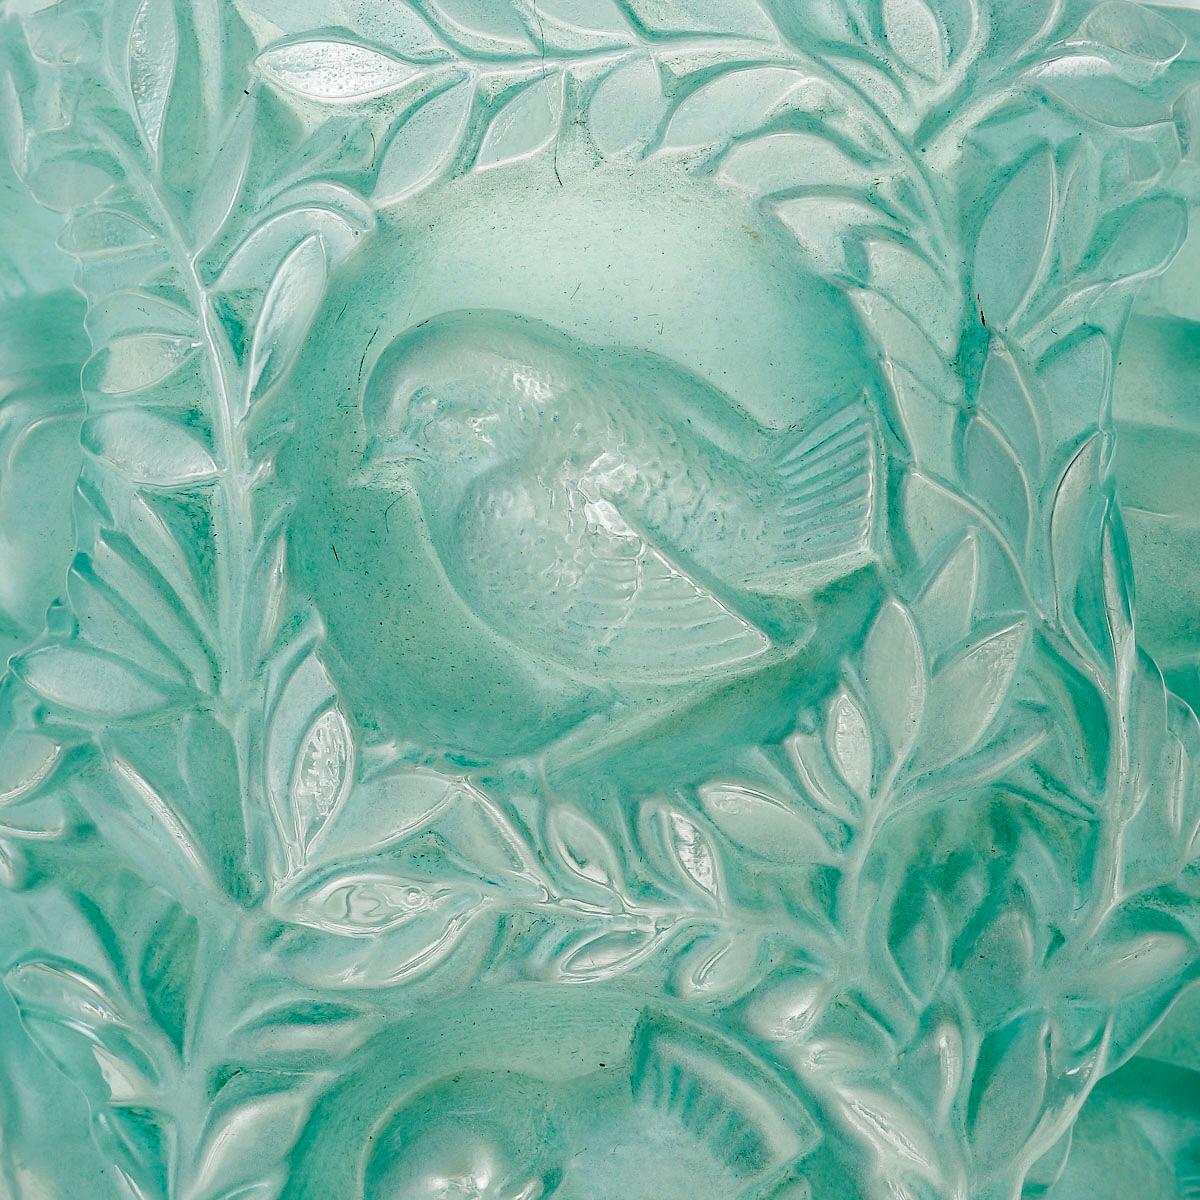 French 1939 Rene Lalique Vase Bagatelle Frosted Glass with Turquoise Green Patina